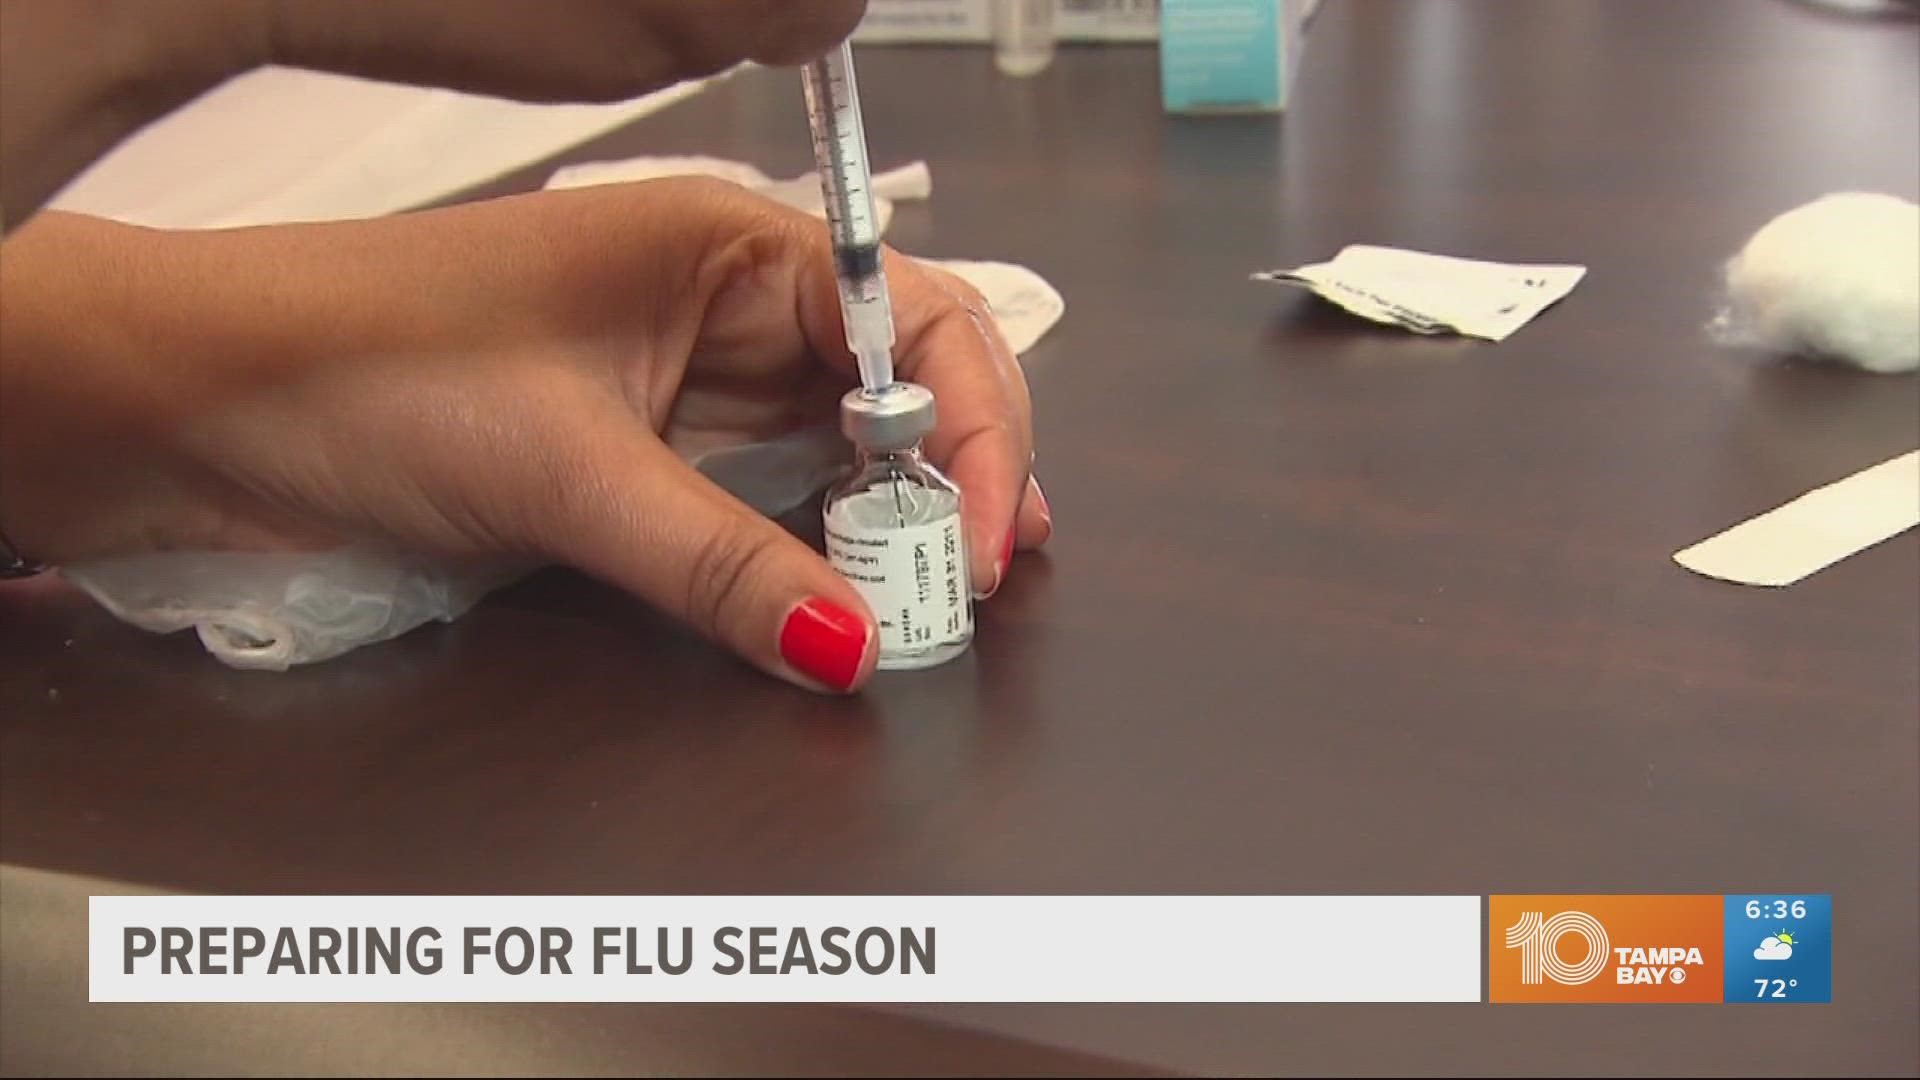 Flu shots can prevent you from getting a severe case of the virus.